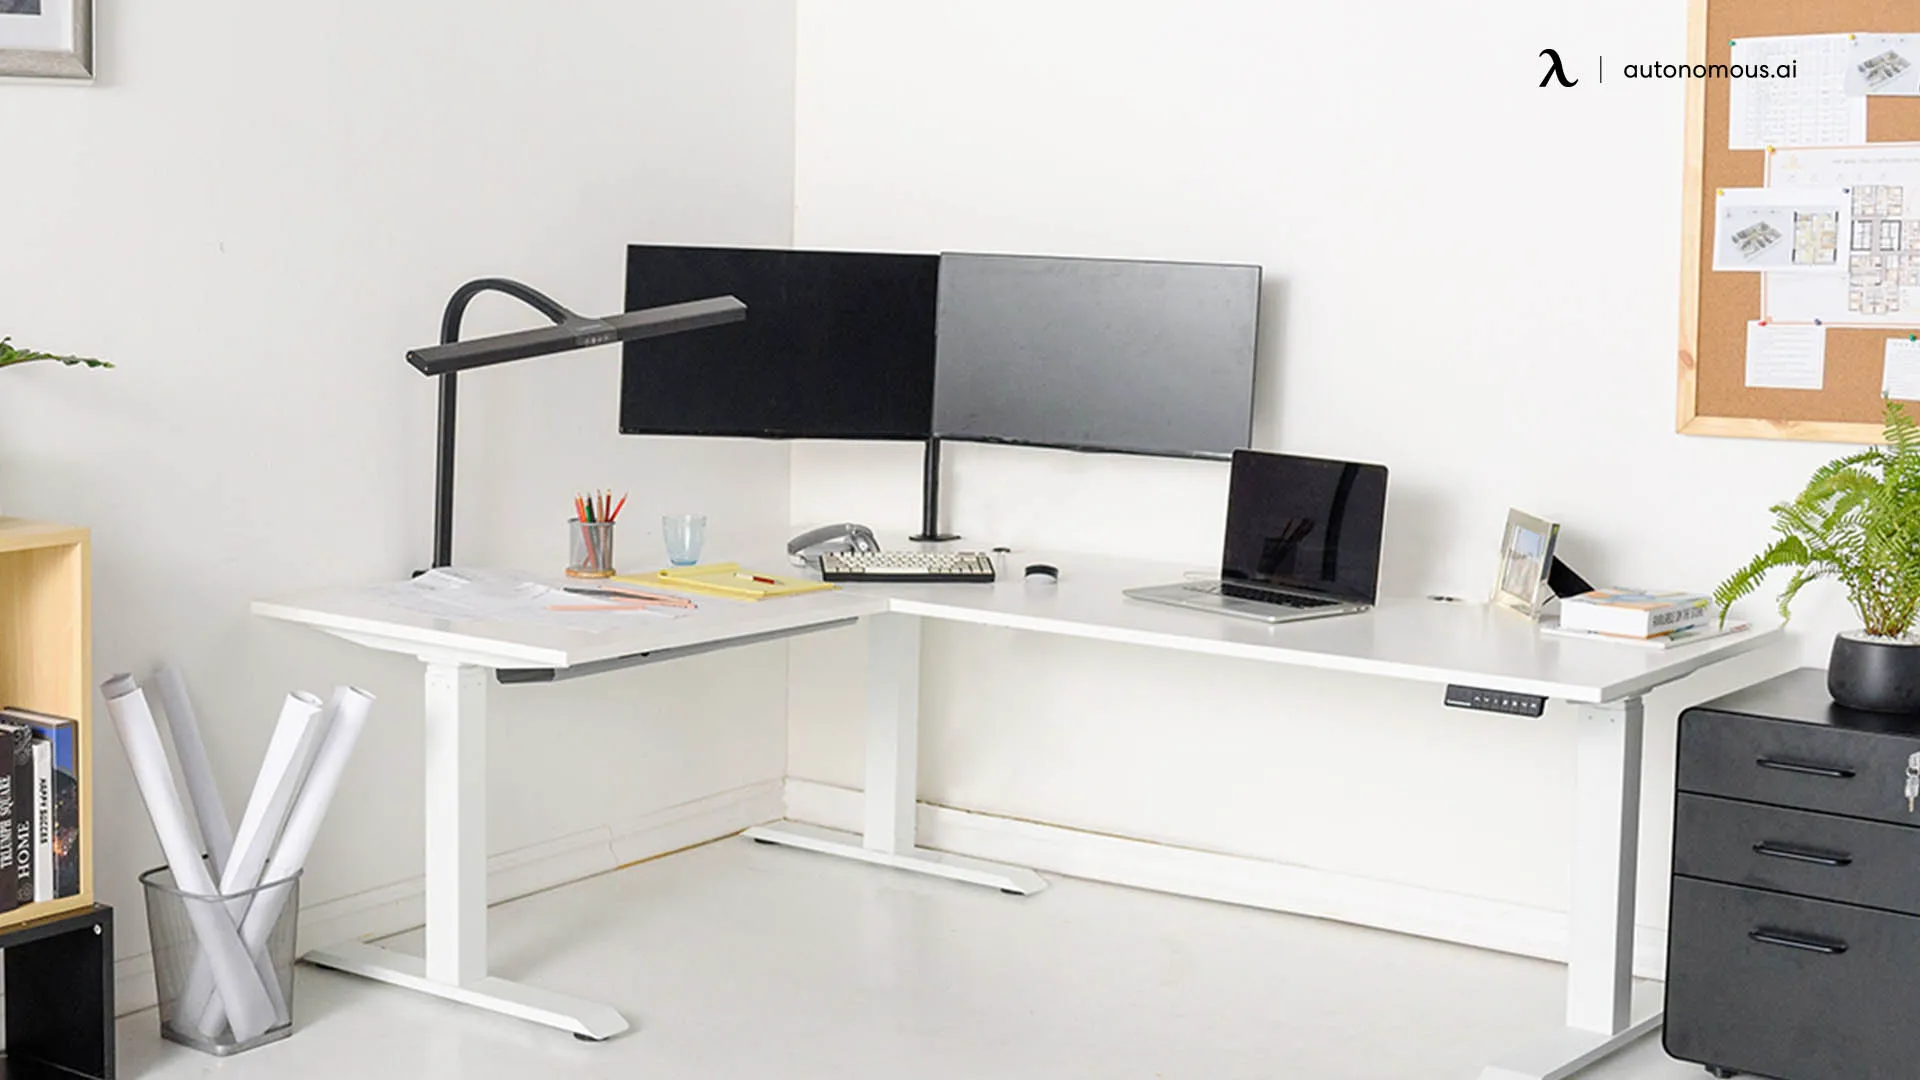 These Desks Can Fit in Any Corner